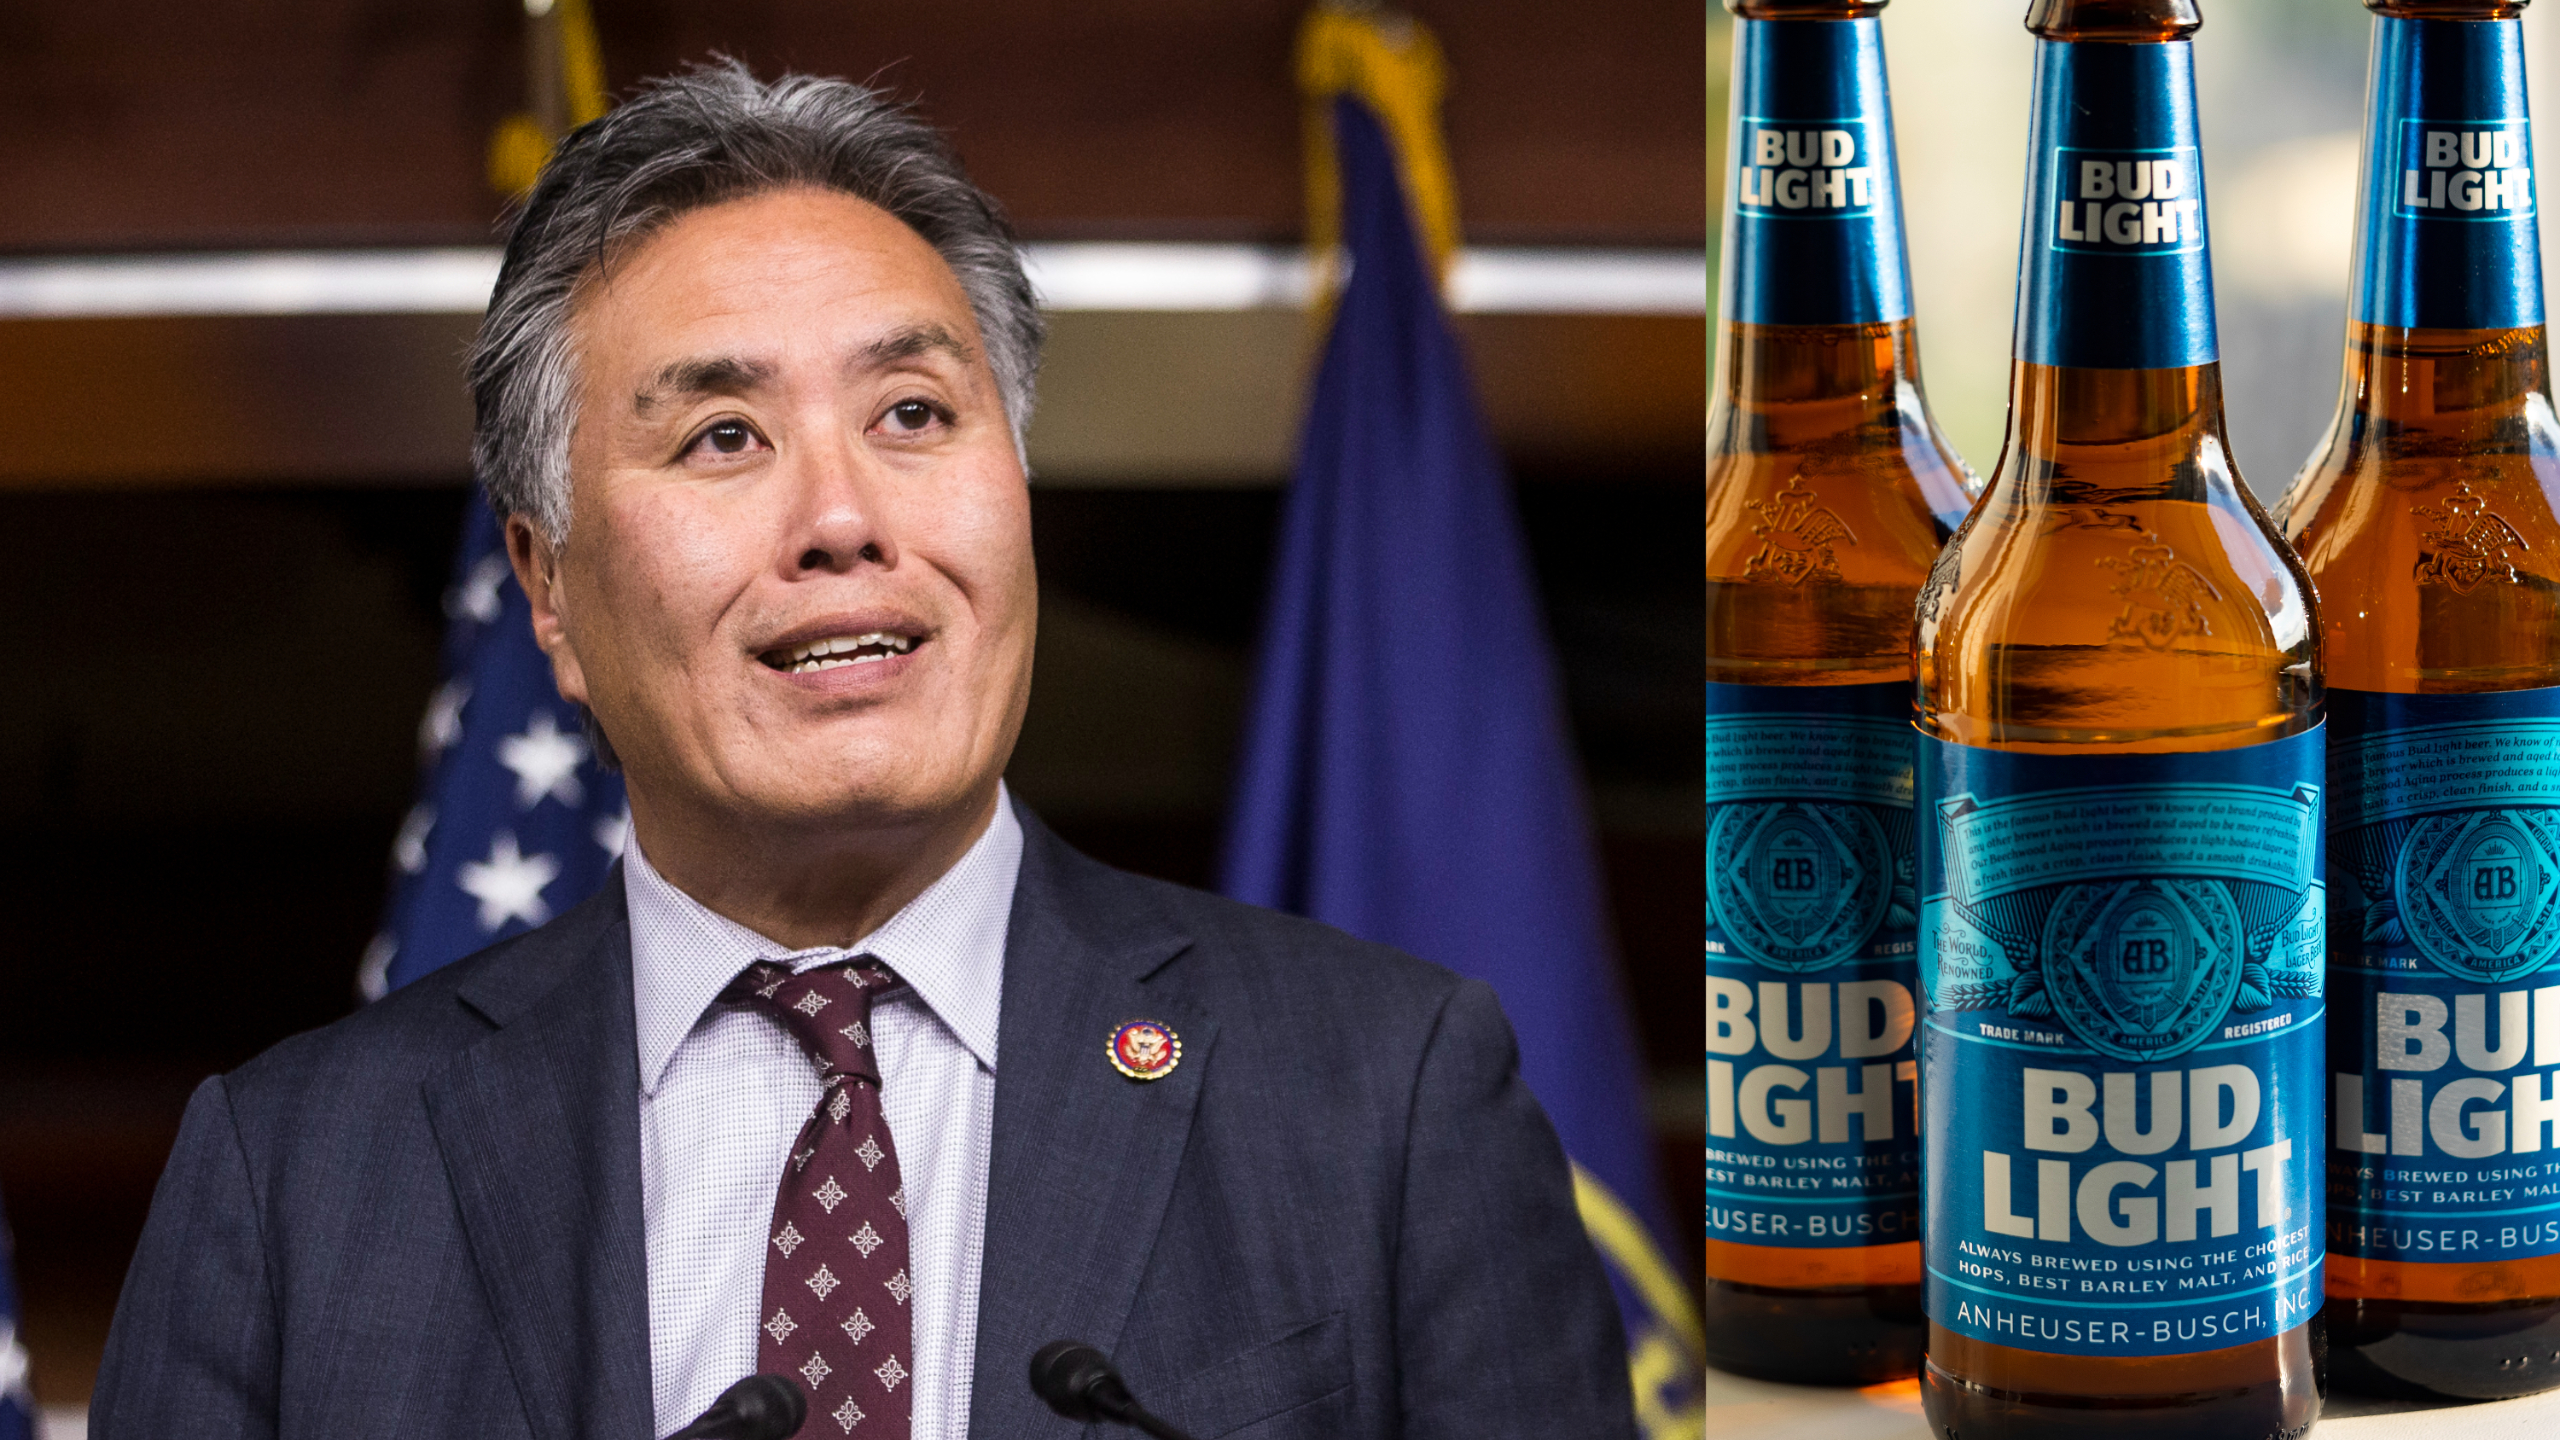 Democratic Lawmaker Who Infamously Failed To Answer ‘What Is A Woman?’ Poses With Bud Light Bottle